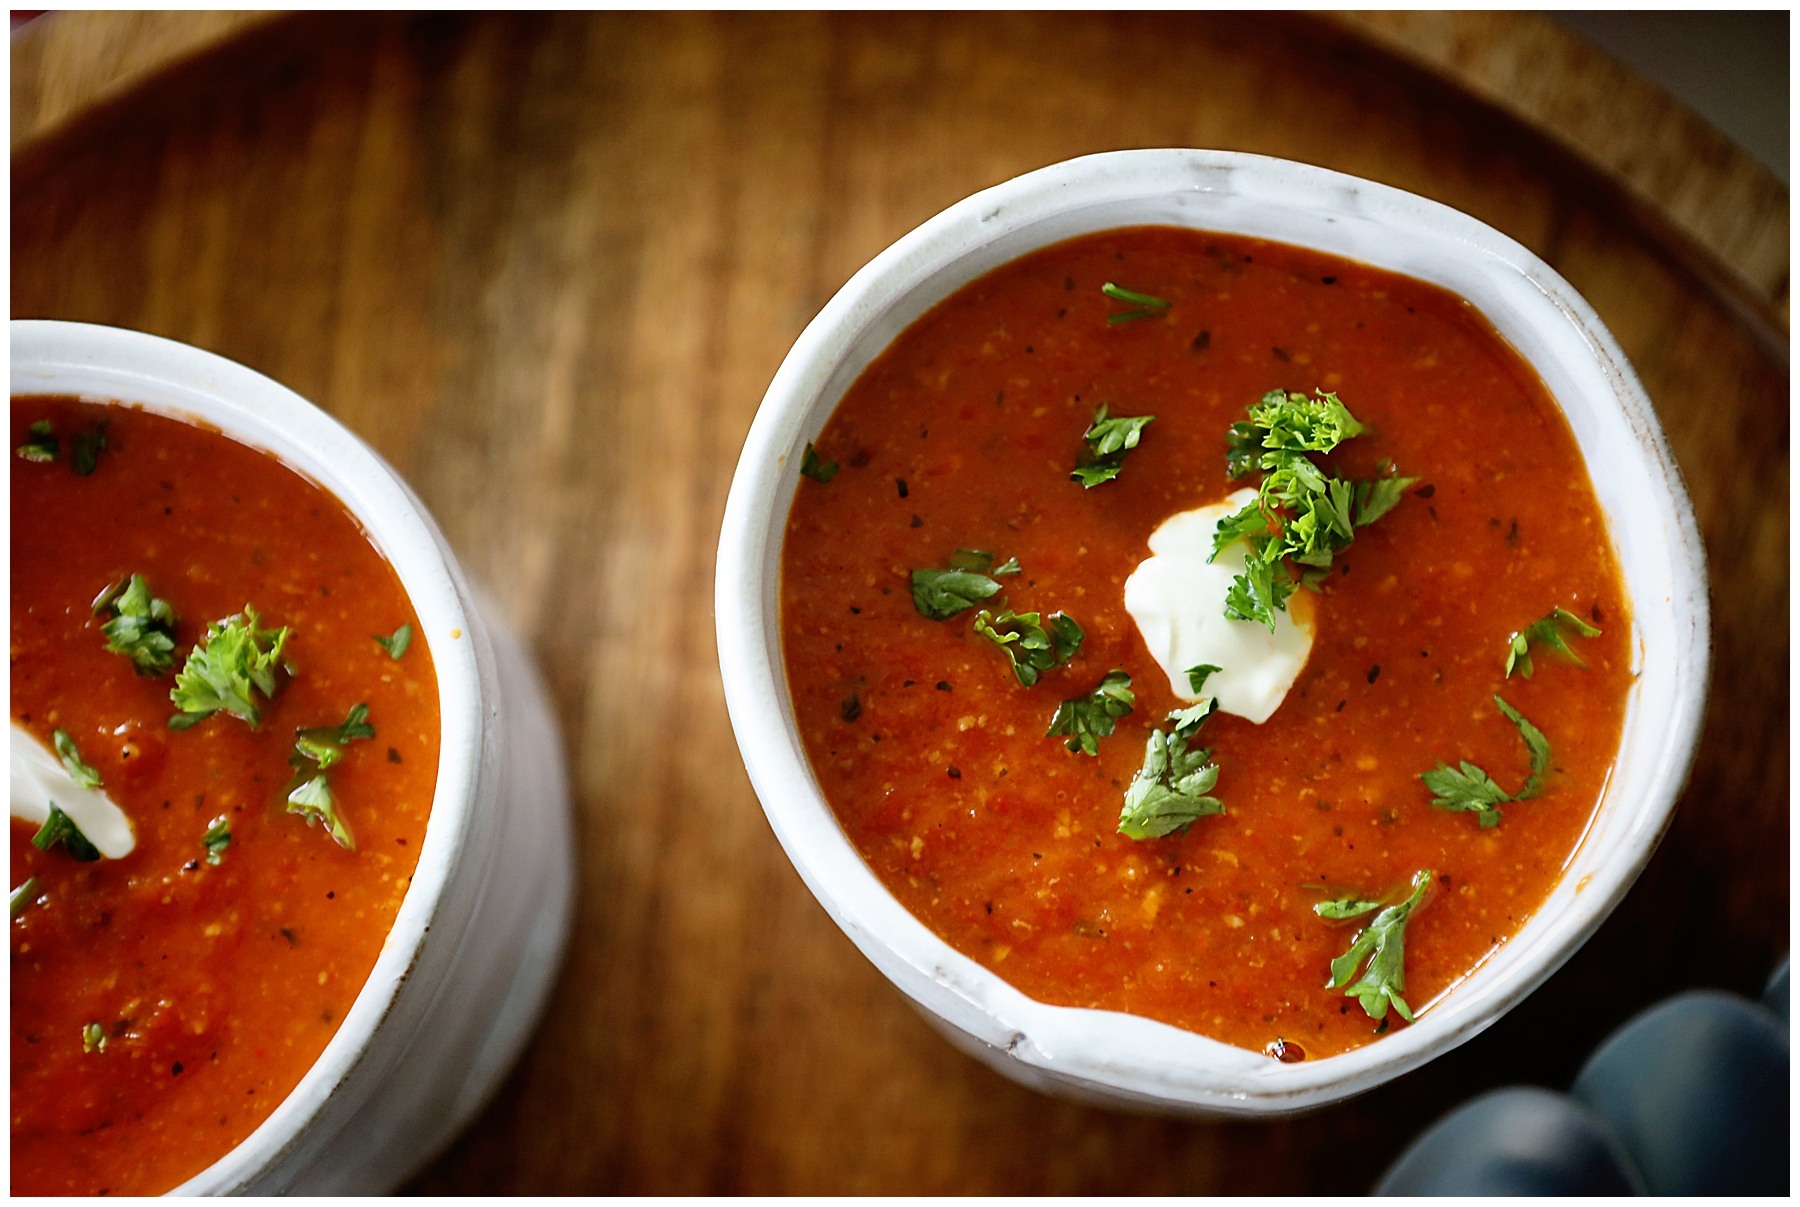 Roasted Red Pepper And Tomato Soup